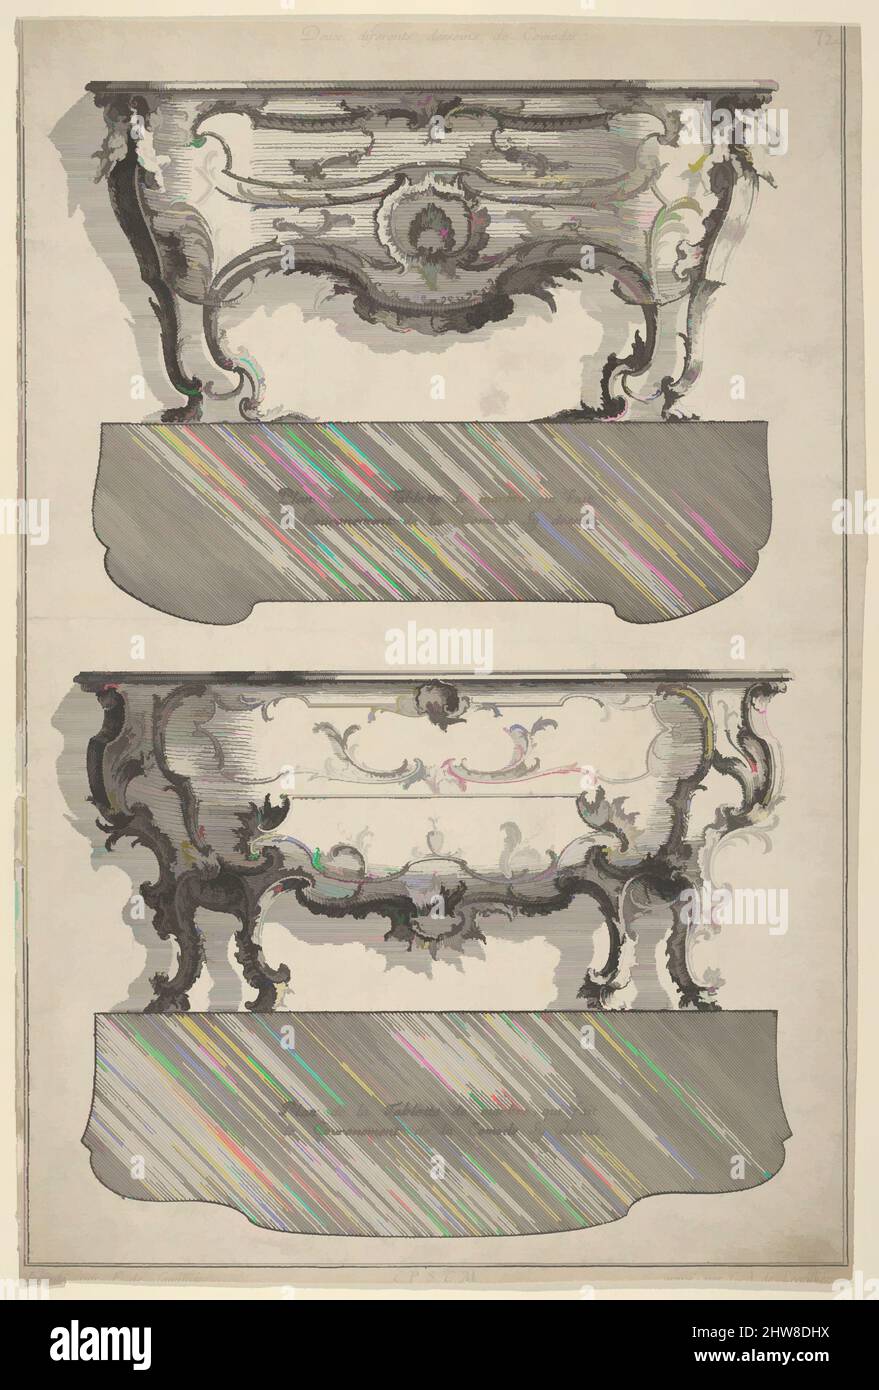 Art inspired by Designs for Two Commodes, from 'Livre de differents dessein de Comodes', 1745–56, Etching, Sheet: 13 5/16 × 9 in. (33.8 × 22.8 cm), Jean François Cuvilliés the Elder (German (born Belgian), Soignies 1695–1768 Munich), Two designs for commodes, placed one above the other, Classic works modernized by Artotop with a splash of modernity. Shapes, color and value, eye-catching visual impact on art. Emotions through freedom of artworks in a contemporary way. A timeless message pursuing a wildly creative new direction. Artists turning to the digital medium and creating the Artotop NFT Stock Photo